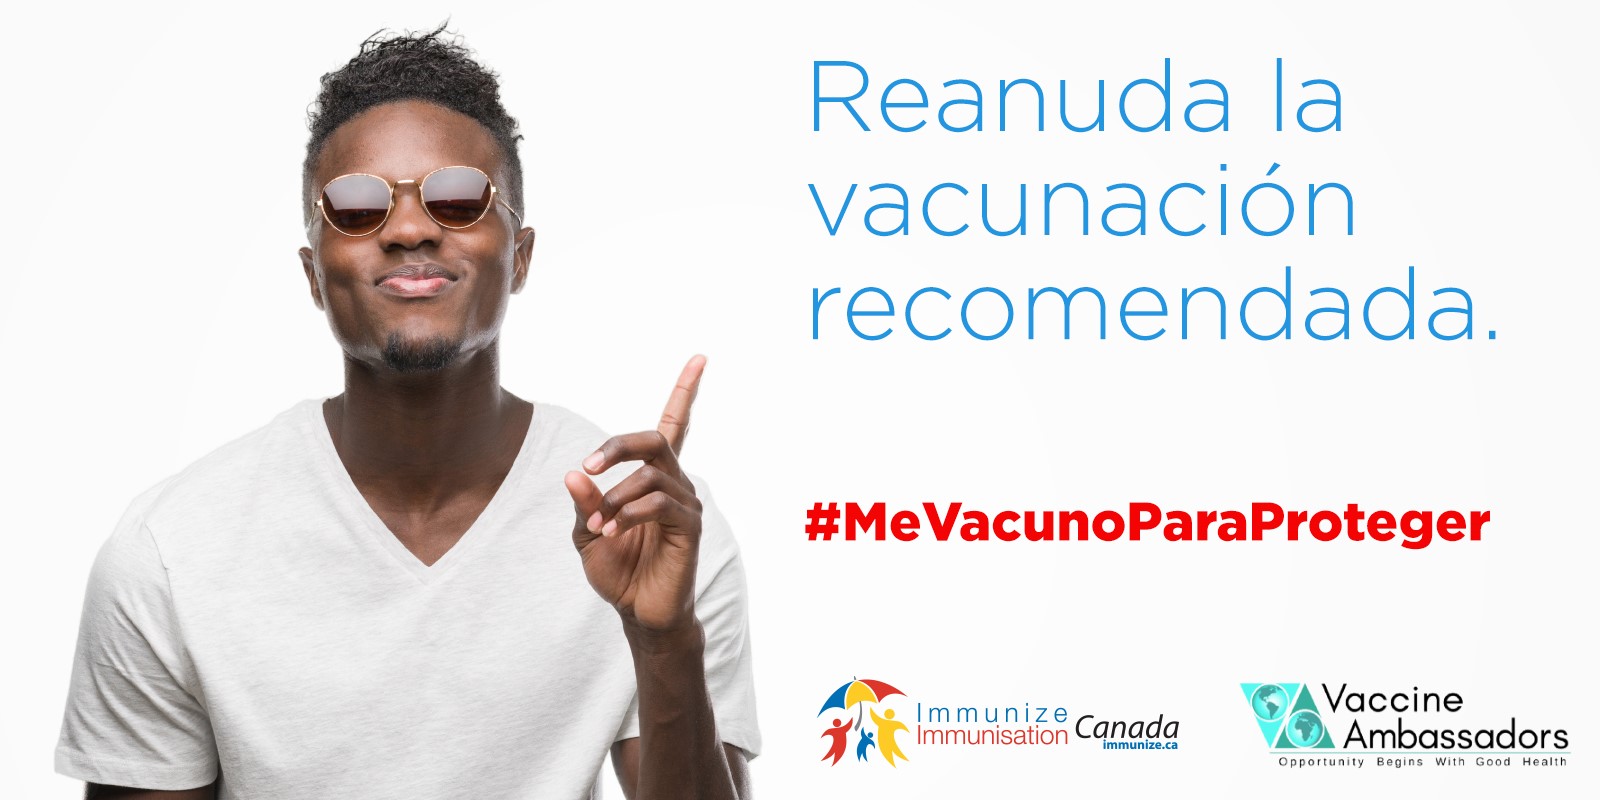 Young adults: Get back on track with recommended vaccinations - Spanish